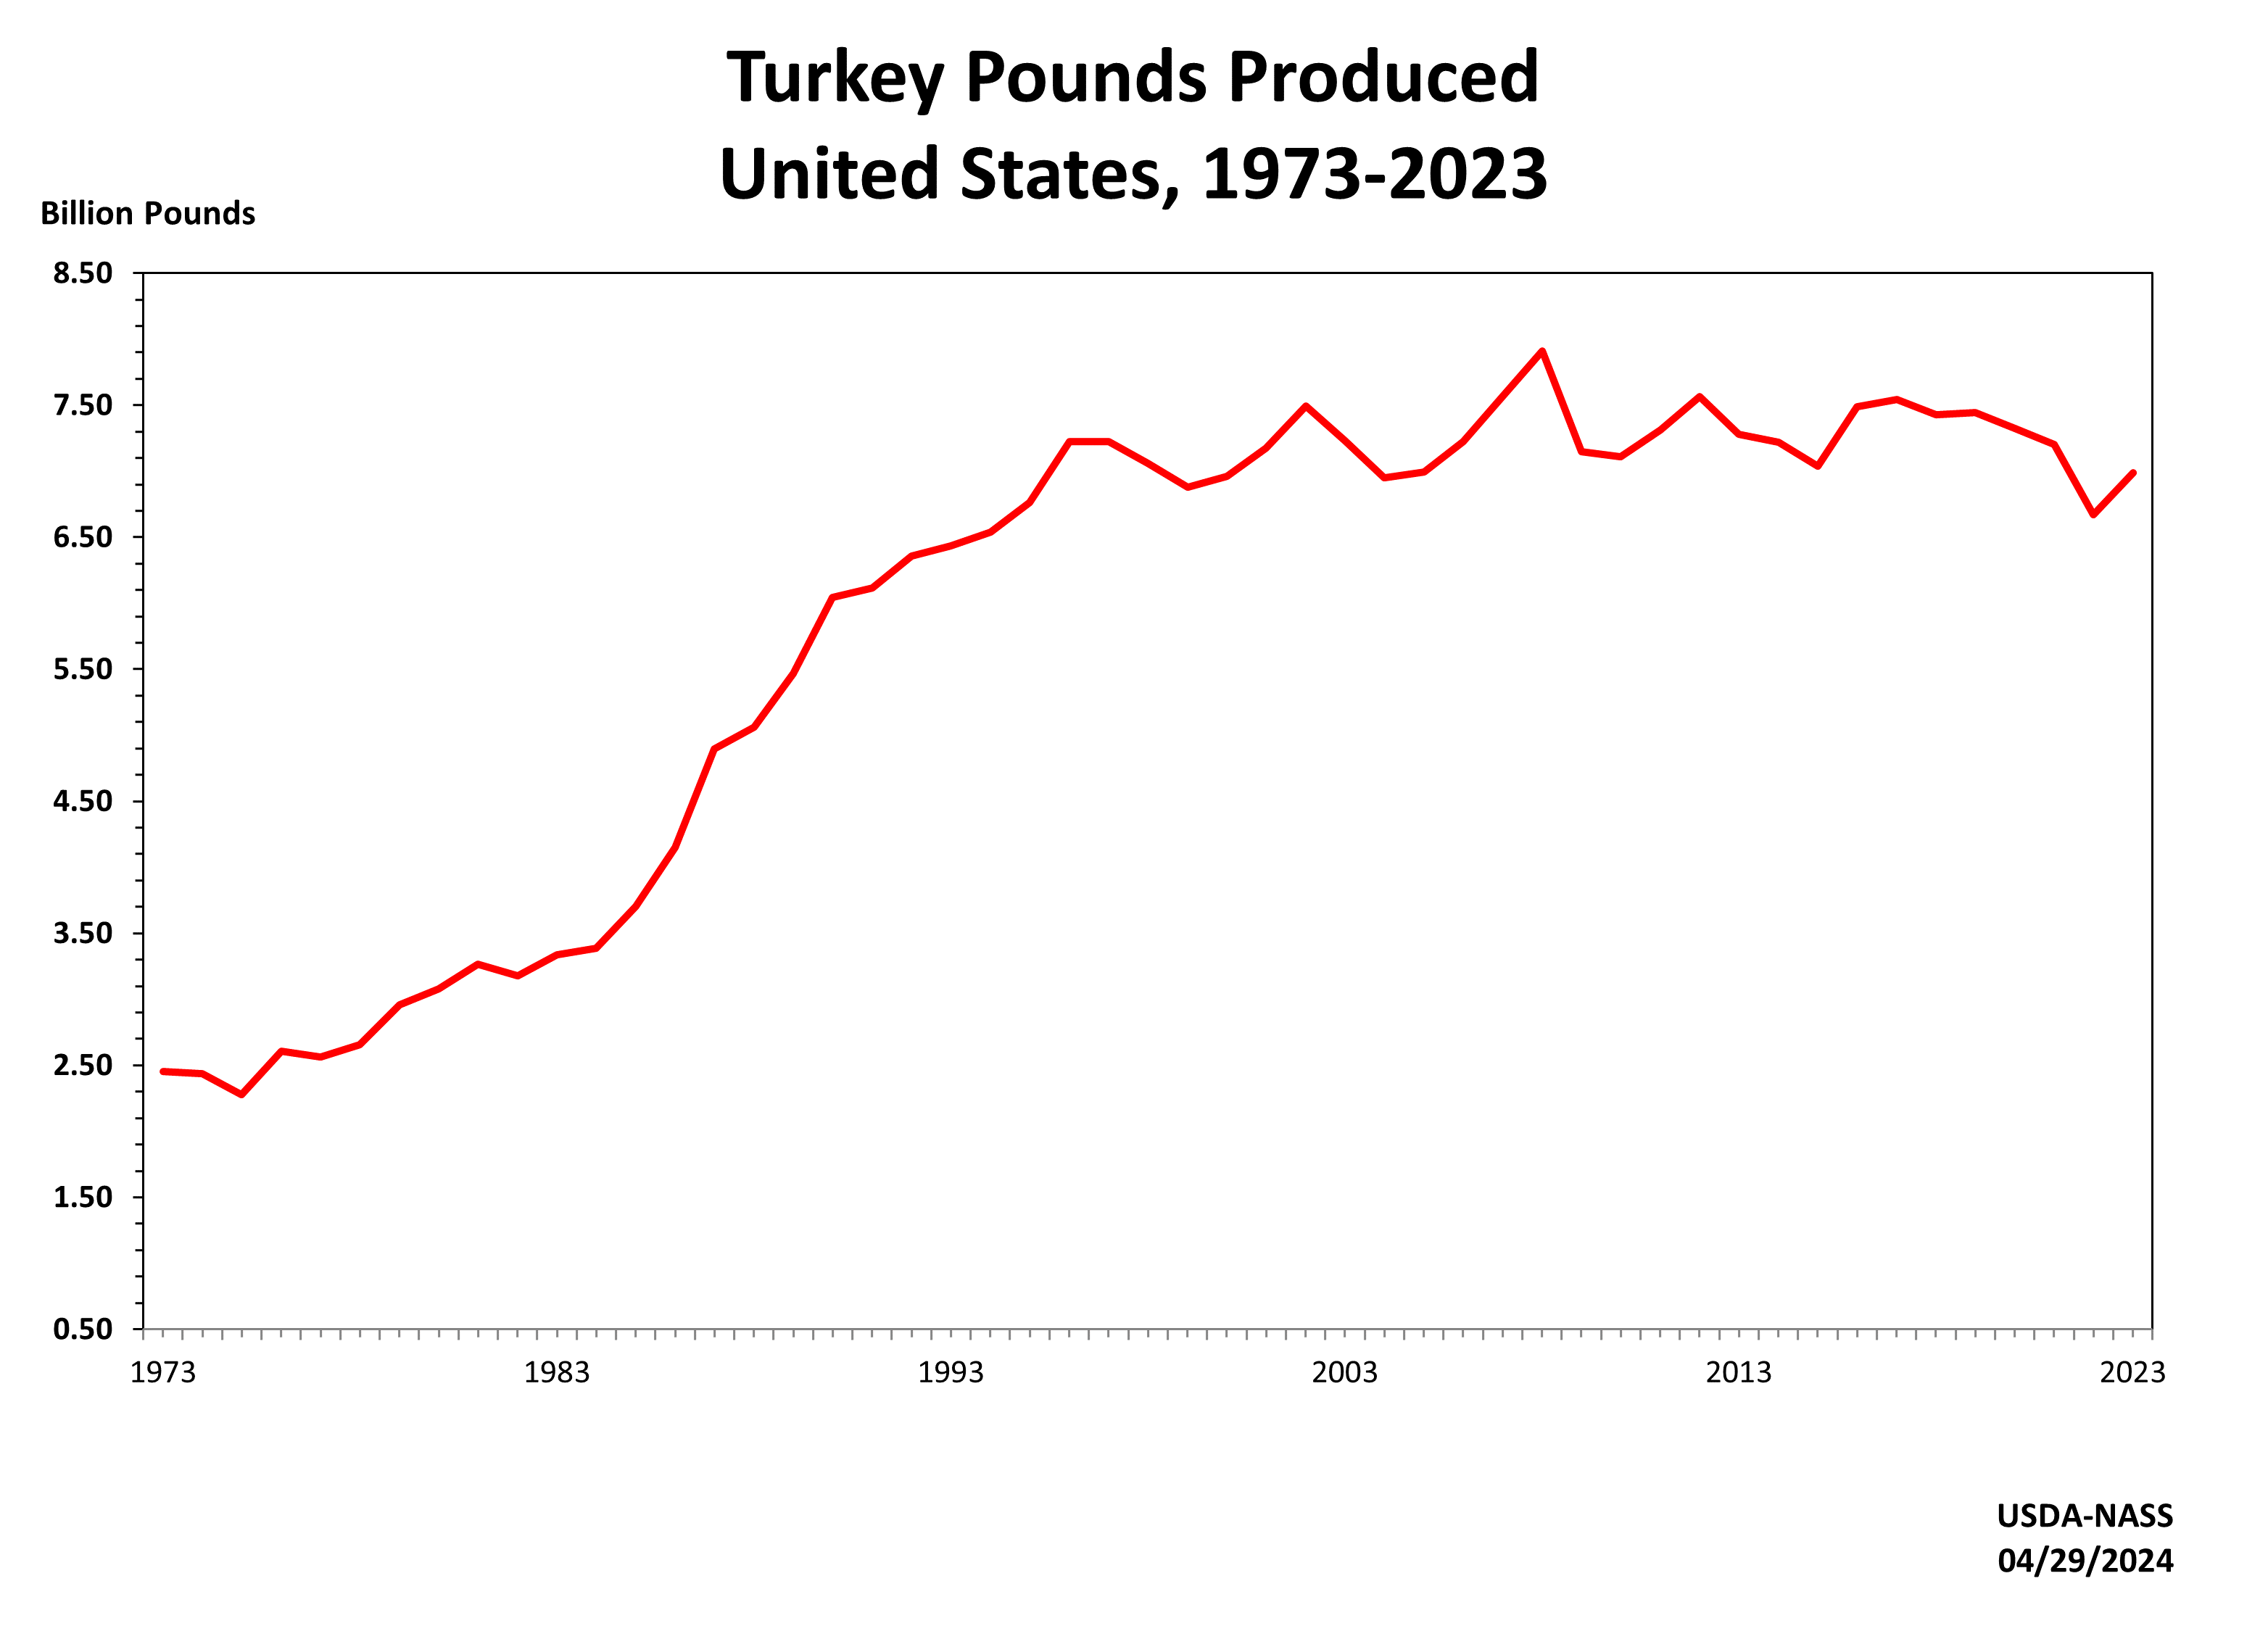 Turkey Production by Year